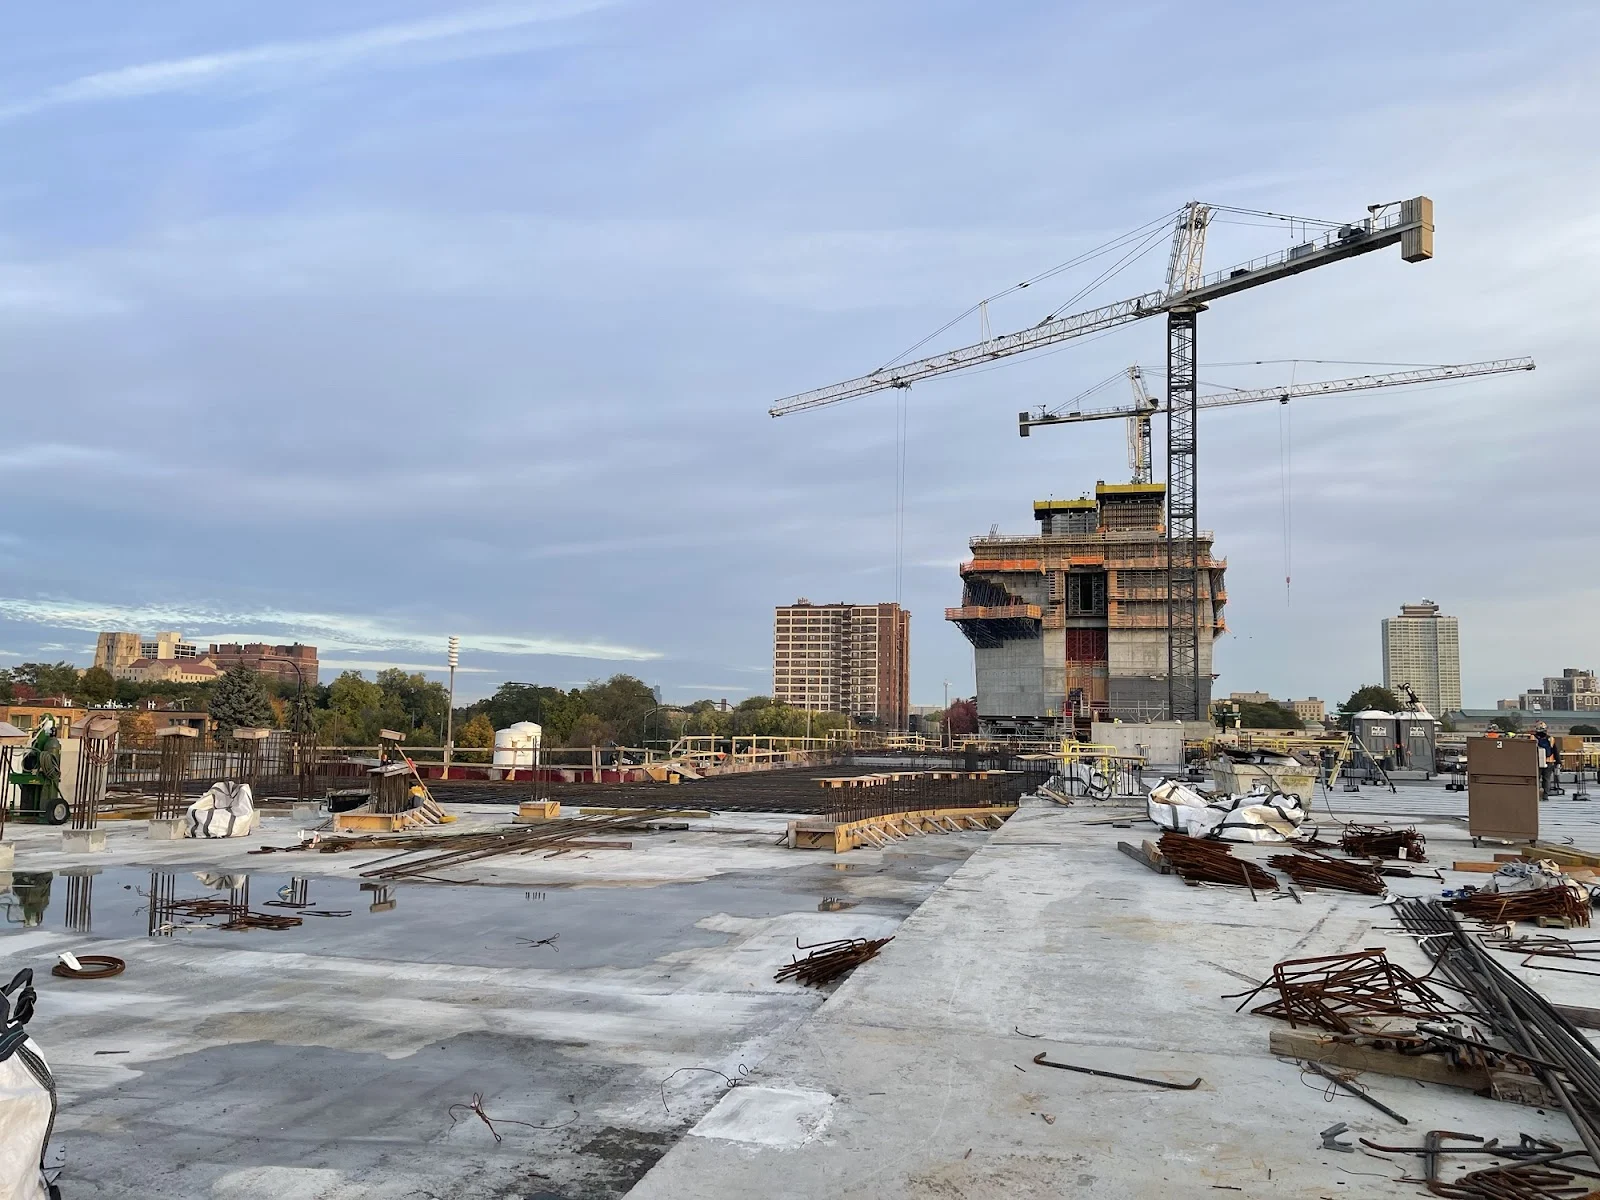 A view of the Museum Building rising to the sky on the site of the Obama Presidential Center. Cranes are in the sky as work continues on the garage rooftop. Construction equipment is scattered throughout.